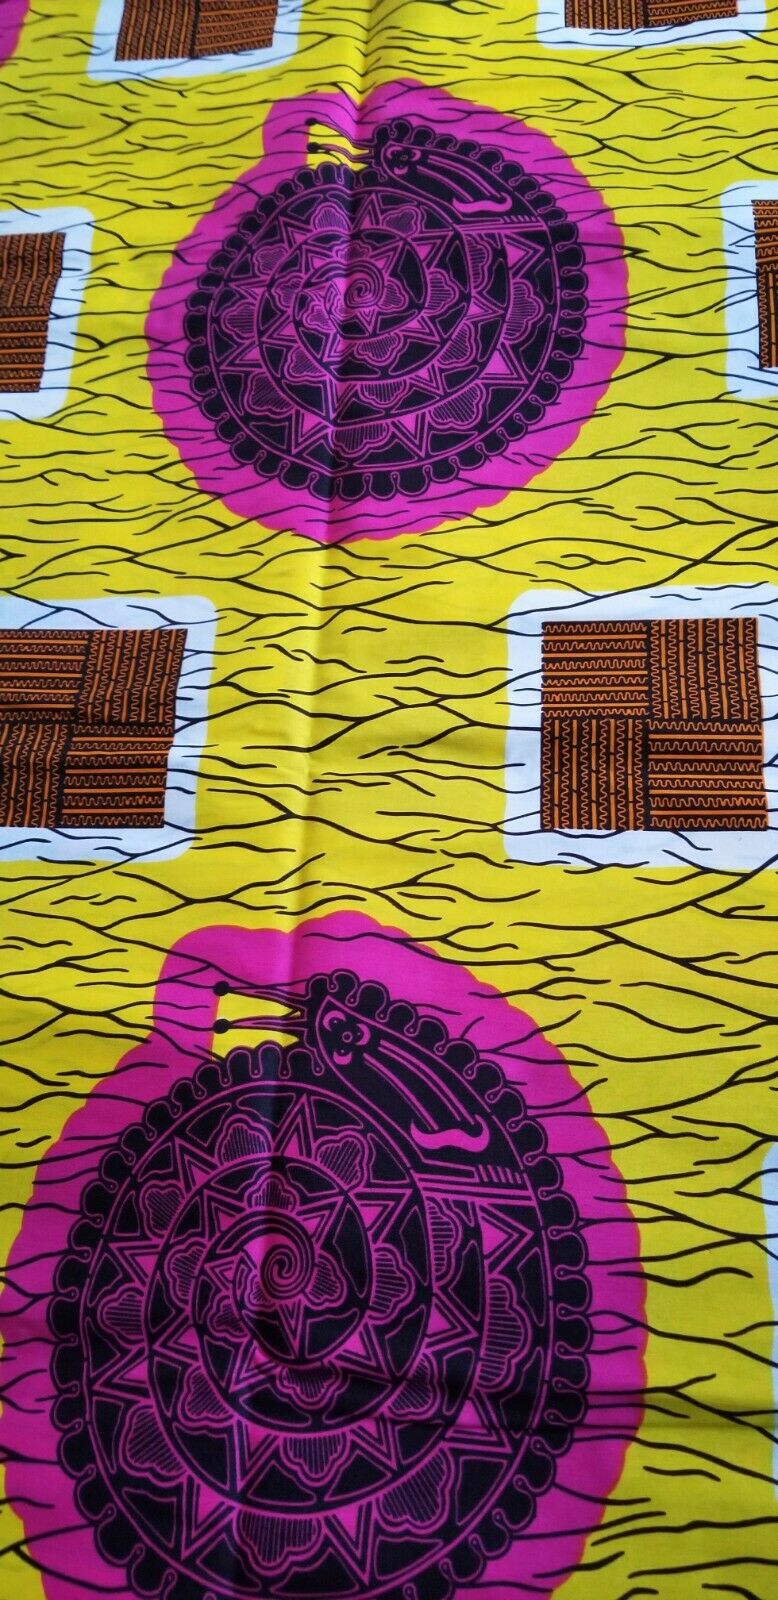 African Print Yelow multi(snails~fruitful)% Cotton Fabric 3 yds×(44 in.) ~$15.50